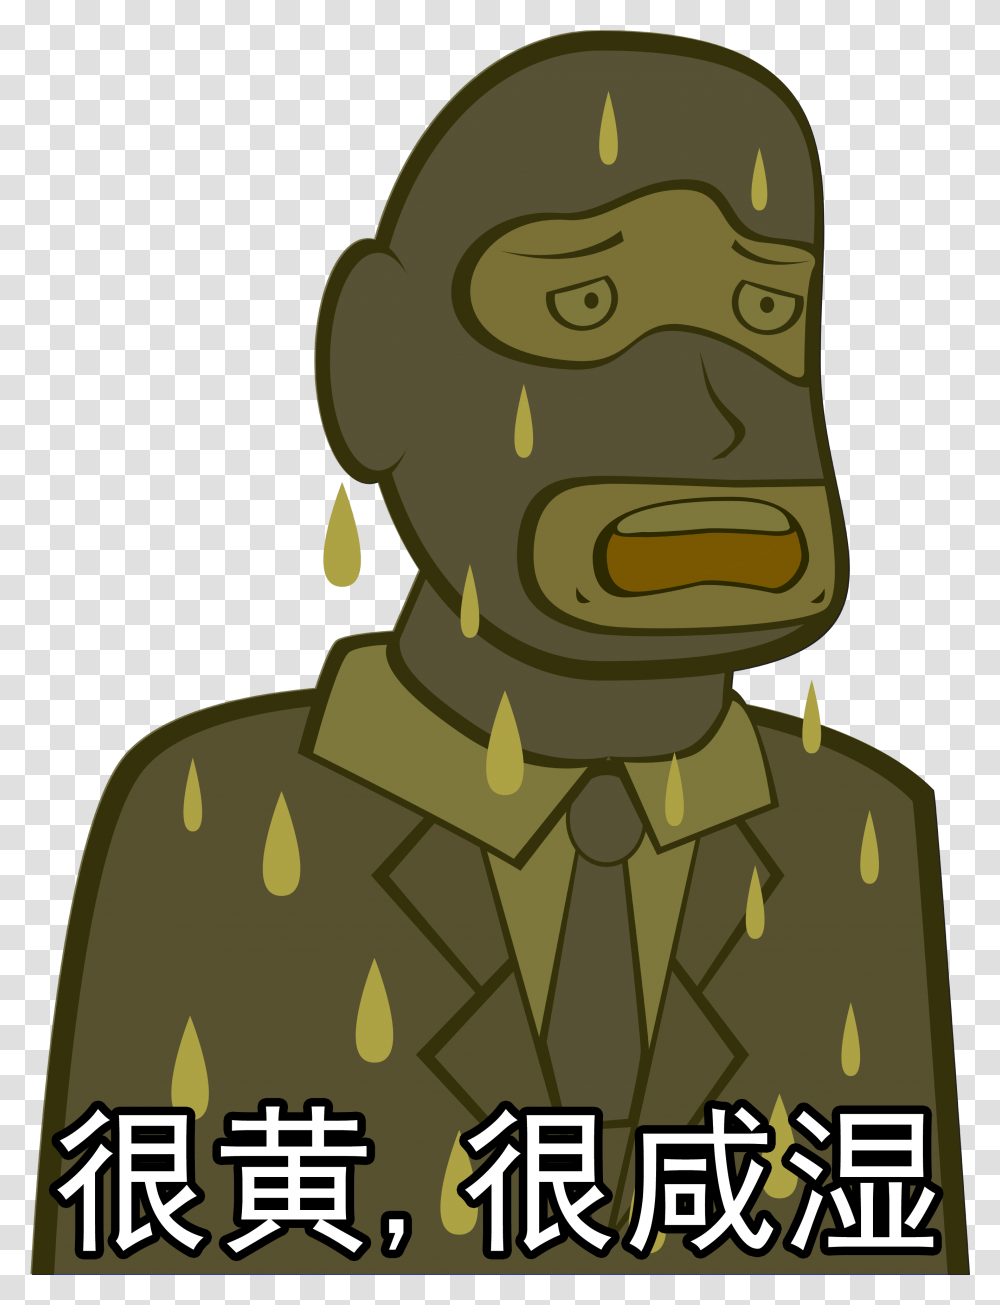 Team Fortress 2 Yellow Cartoon Military Camouflage Tf2 Salty Memes, Military Uniform, Head, Face, Soldier Transparent Png